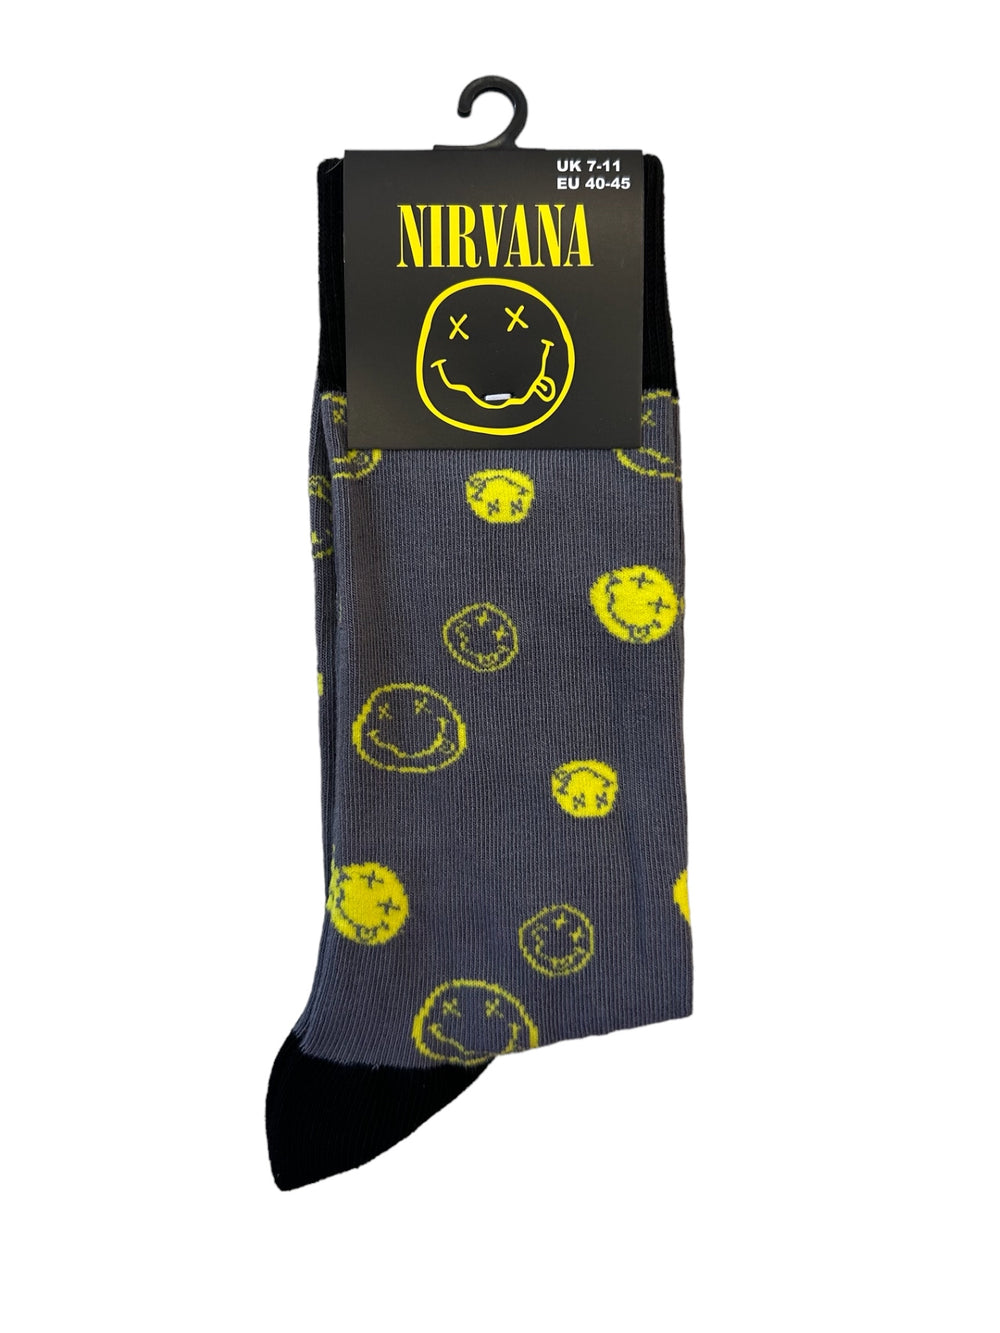 Nirvana Mixed Smileys Official Product 1 Pair Jacquard Socks Brand New